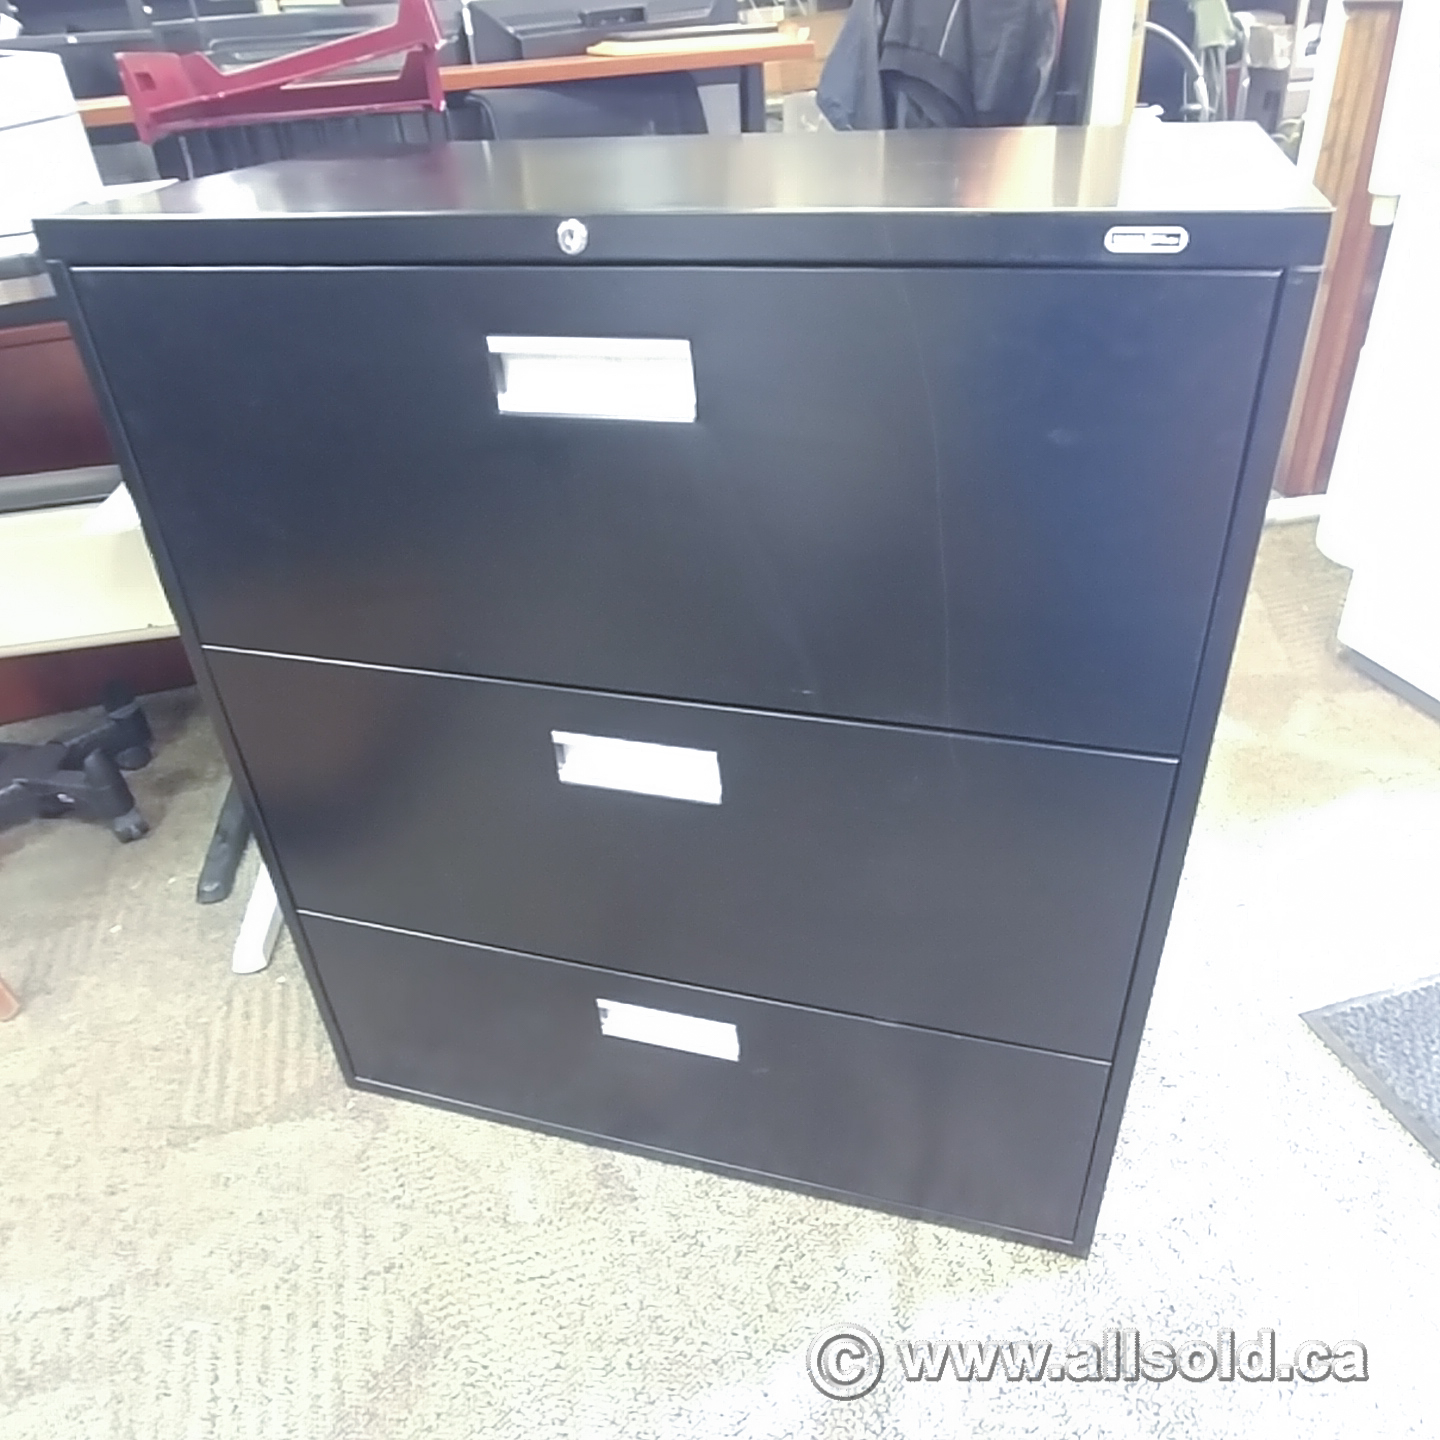 Staples Black 3 Drawer Lateral File Cabinet Locking Allsold Ca